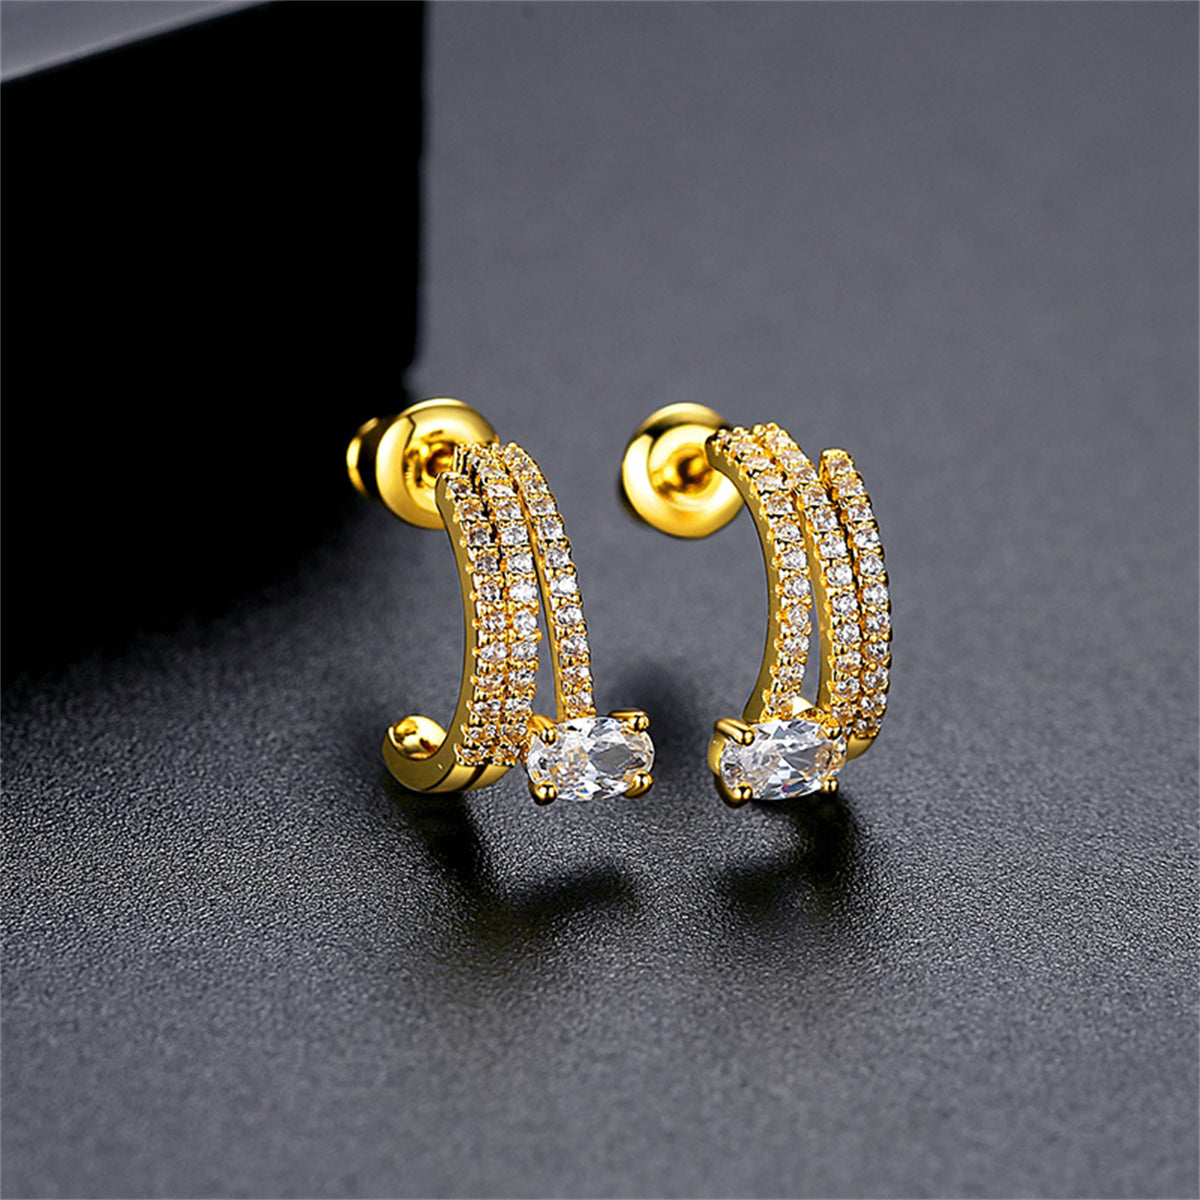 Crystal & 18K Gold-Plated Cubic Zirconia-Accent Layered Huggie Earrings